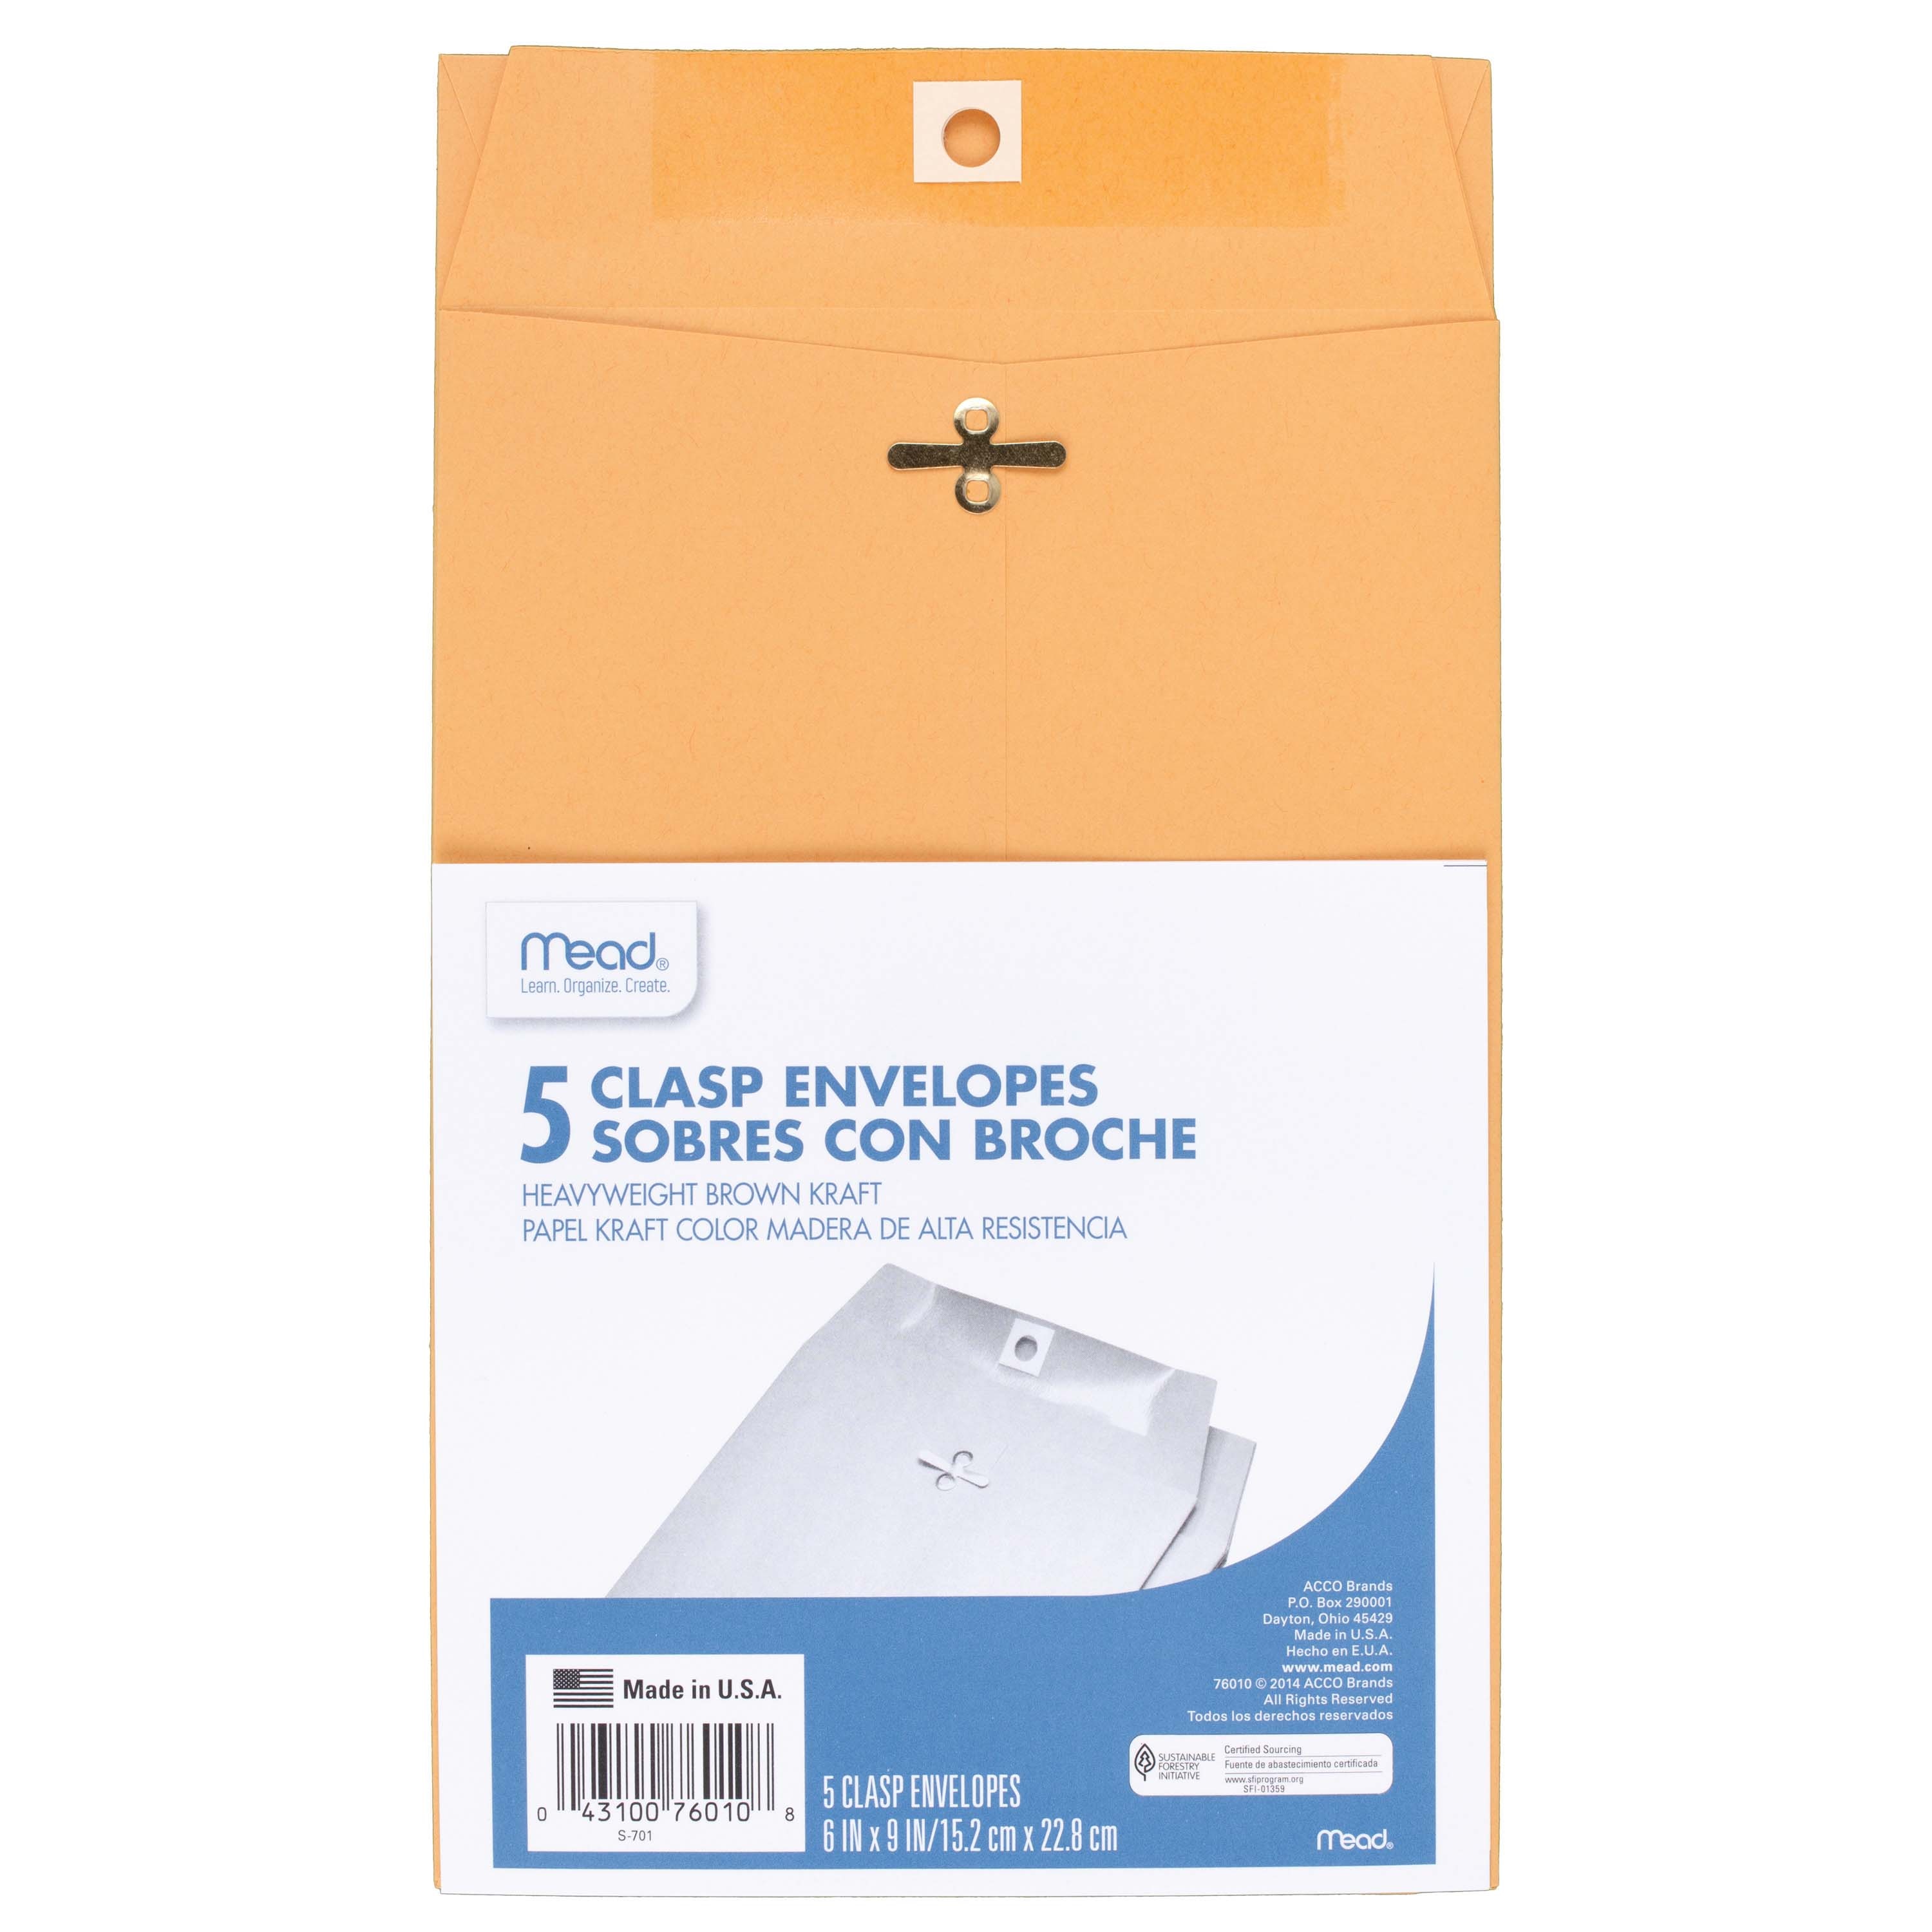 Mead Clasp Envelopes, 6" x 9", Brown Kraft, 5 Count